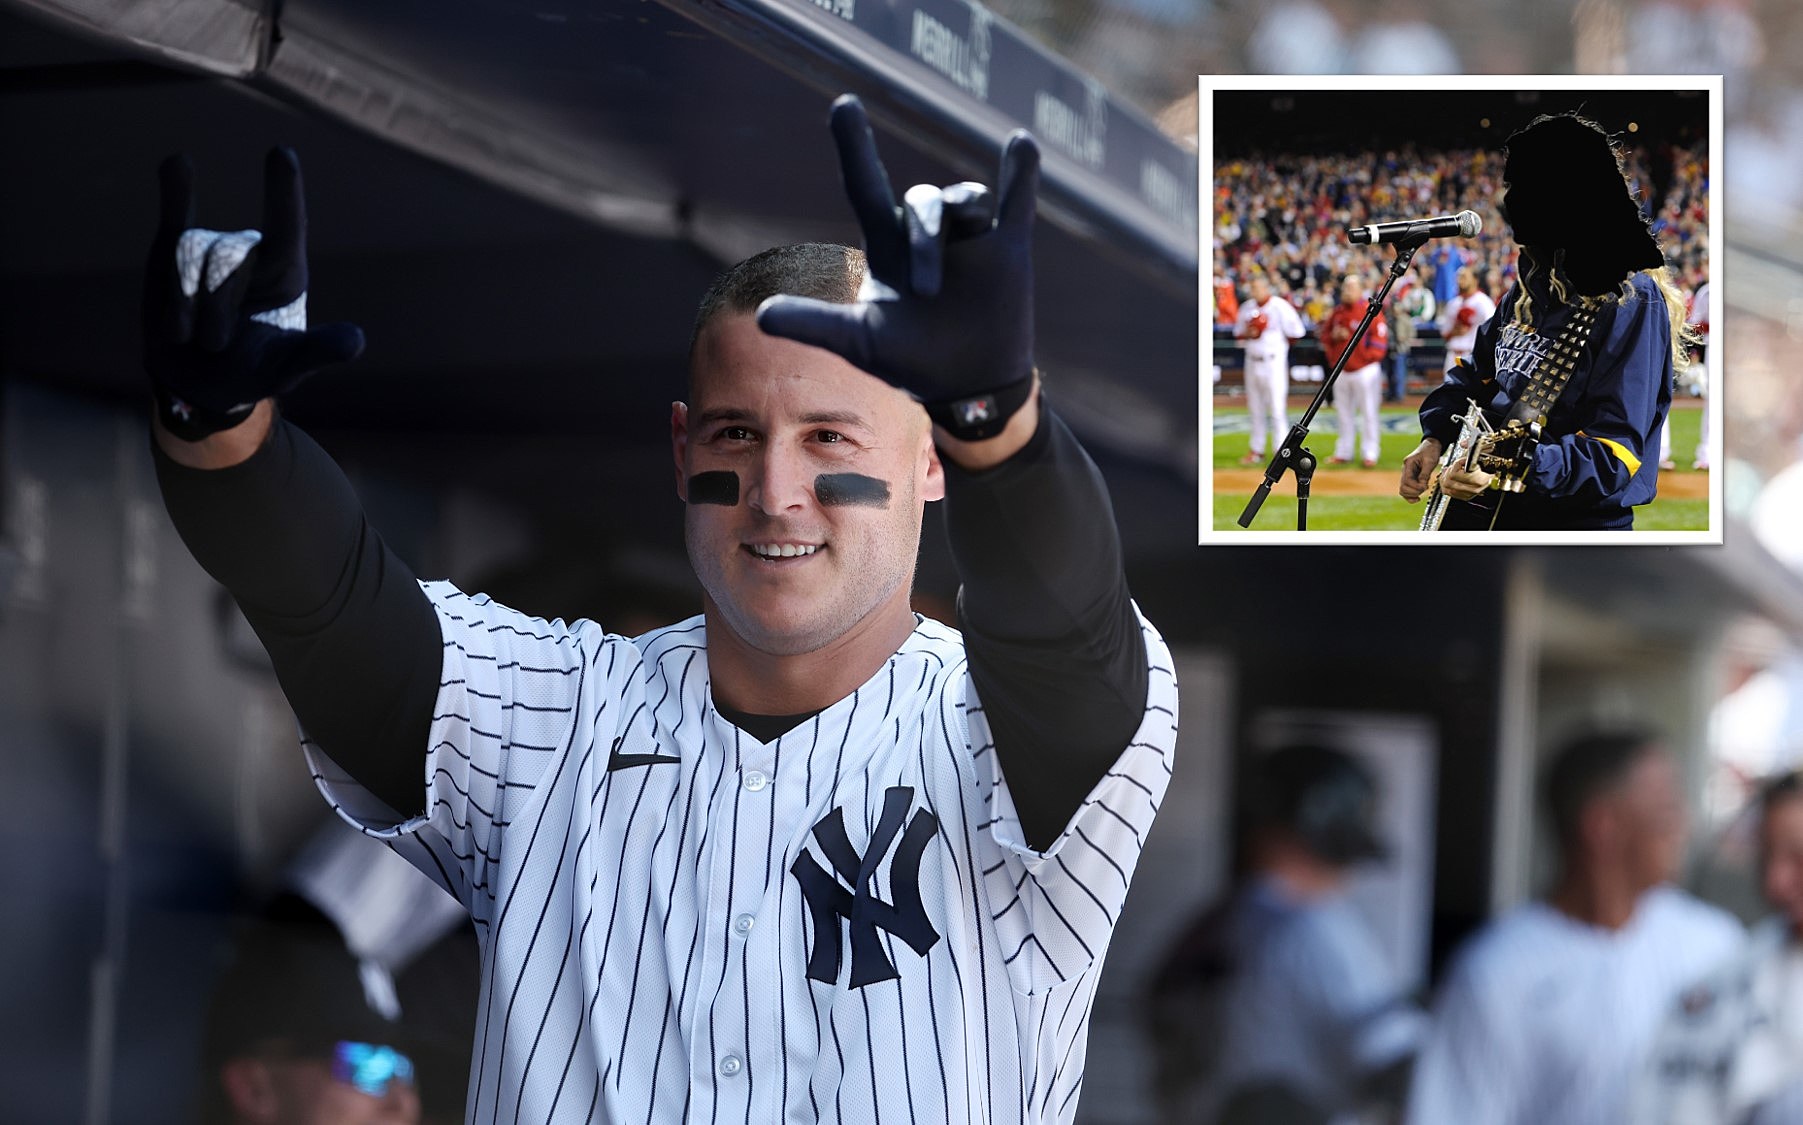 New York Yankees' Fan Caught Red-Handed Tormenting Lone Mets' Fan